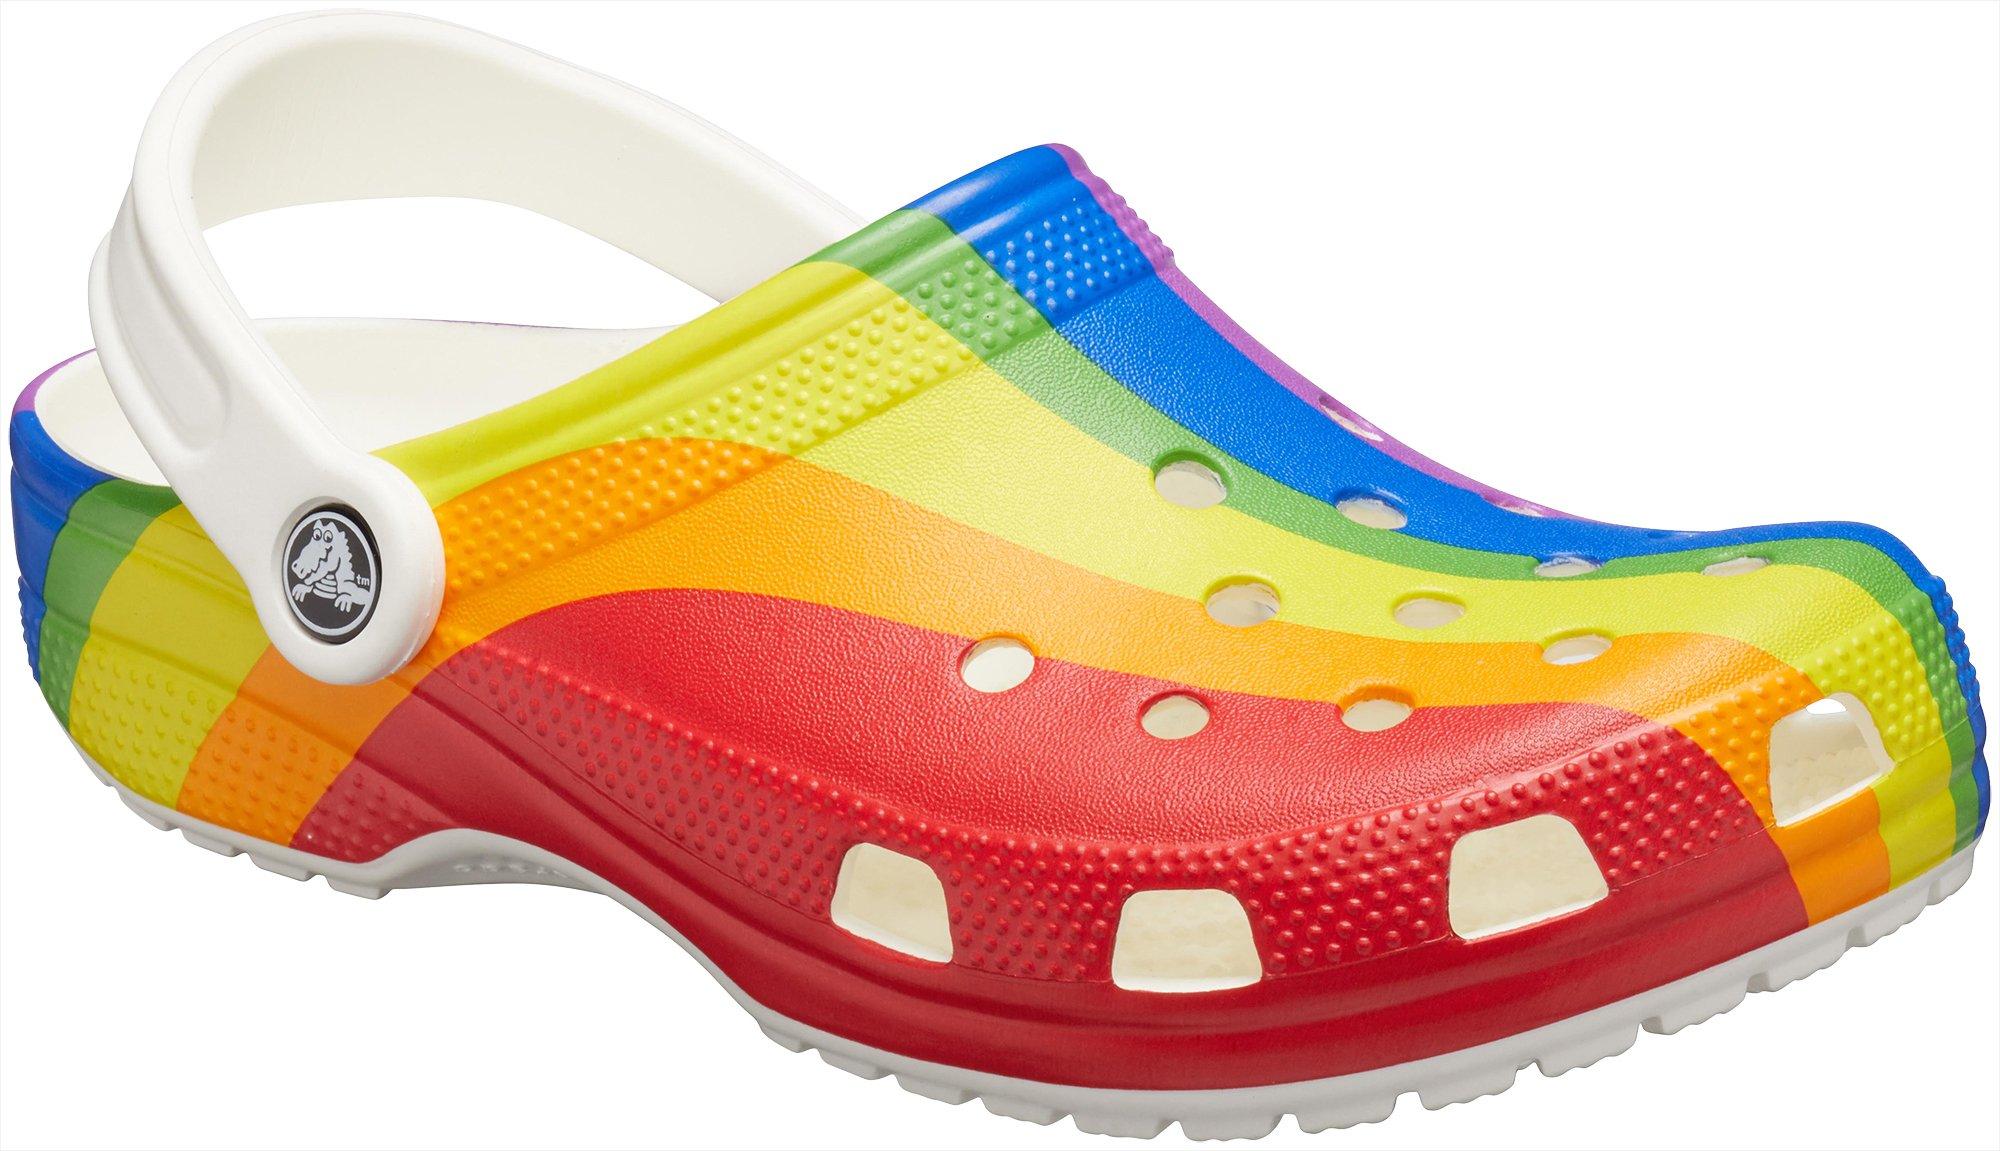 white crocs with crocs on the side in rainbow